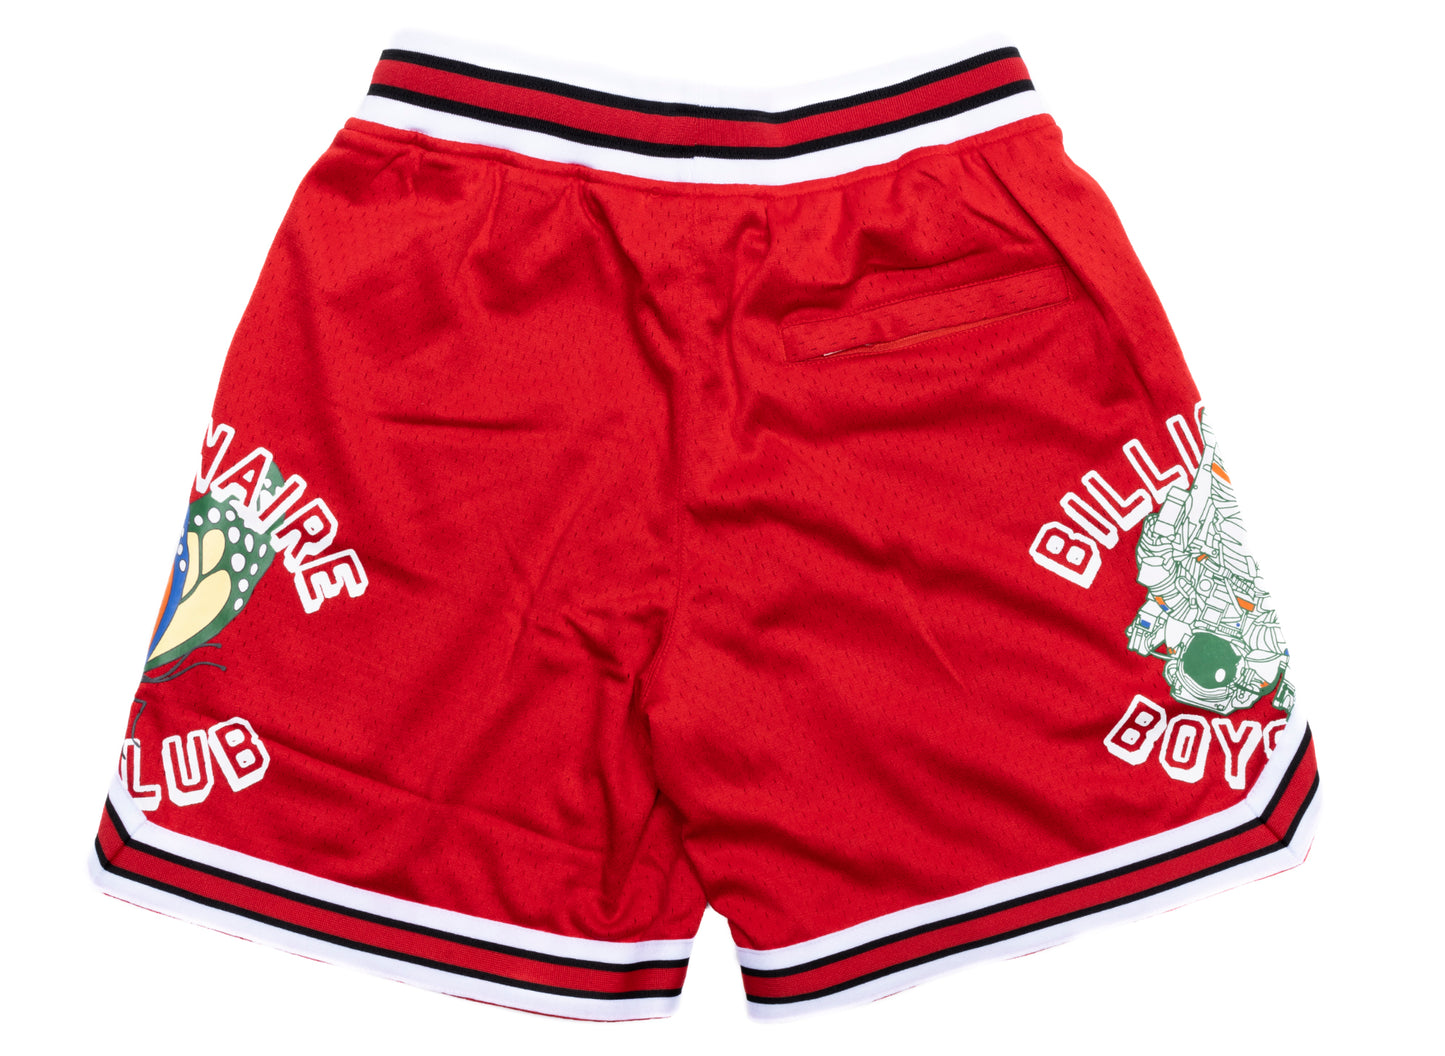 BBC Float Shorts in Red